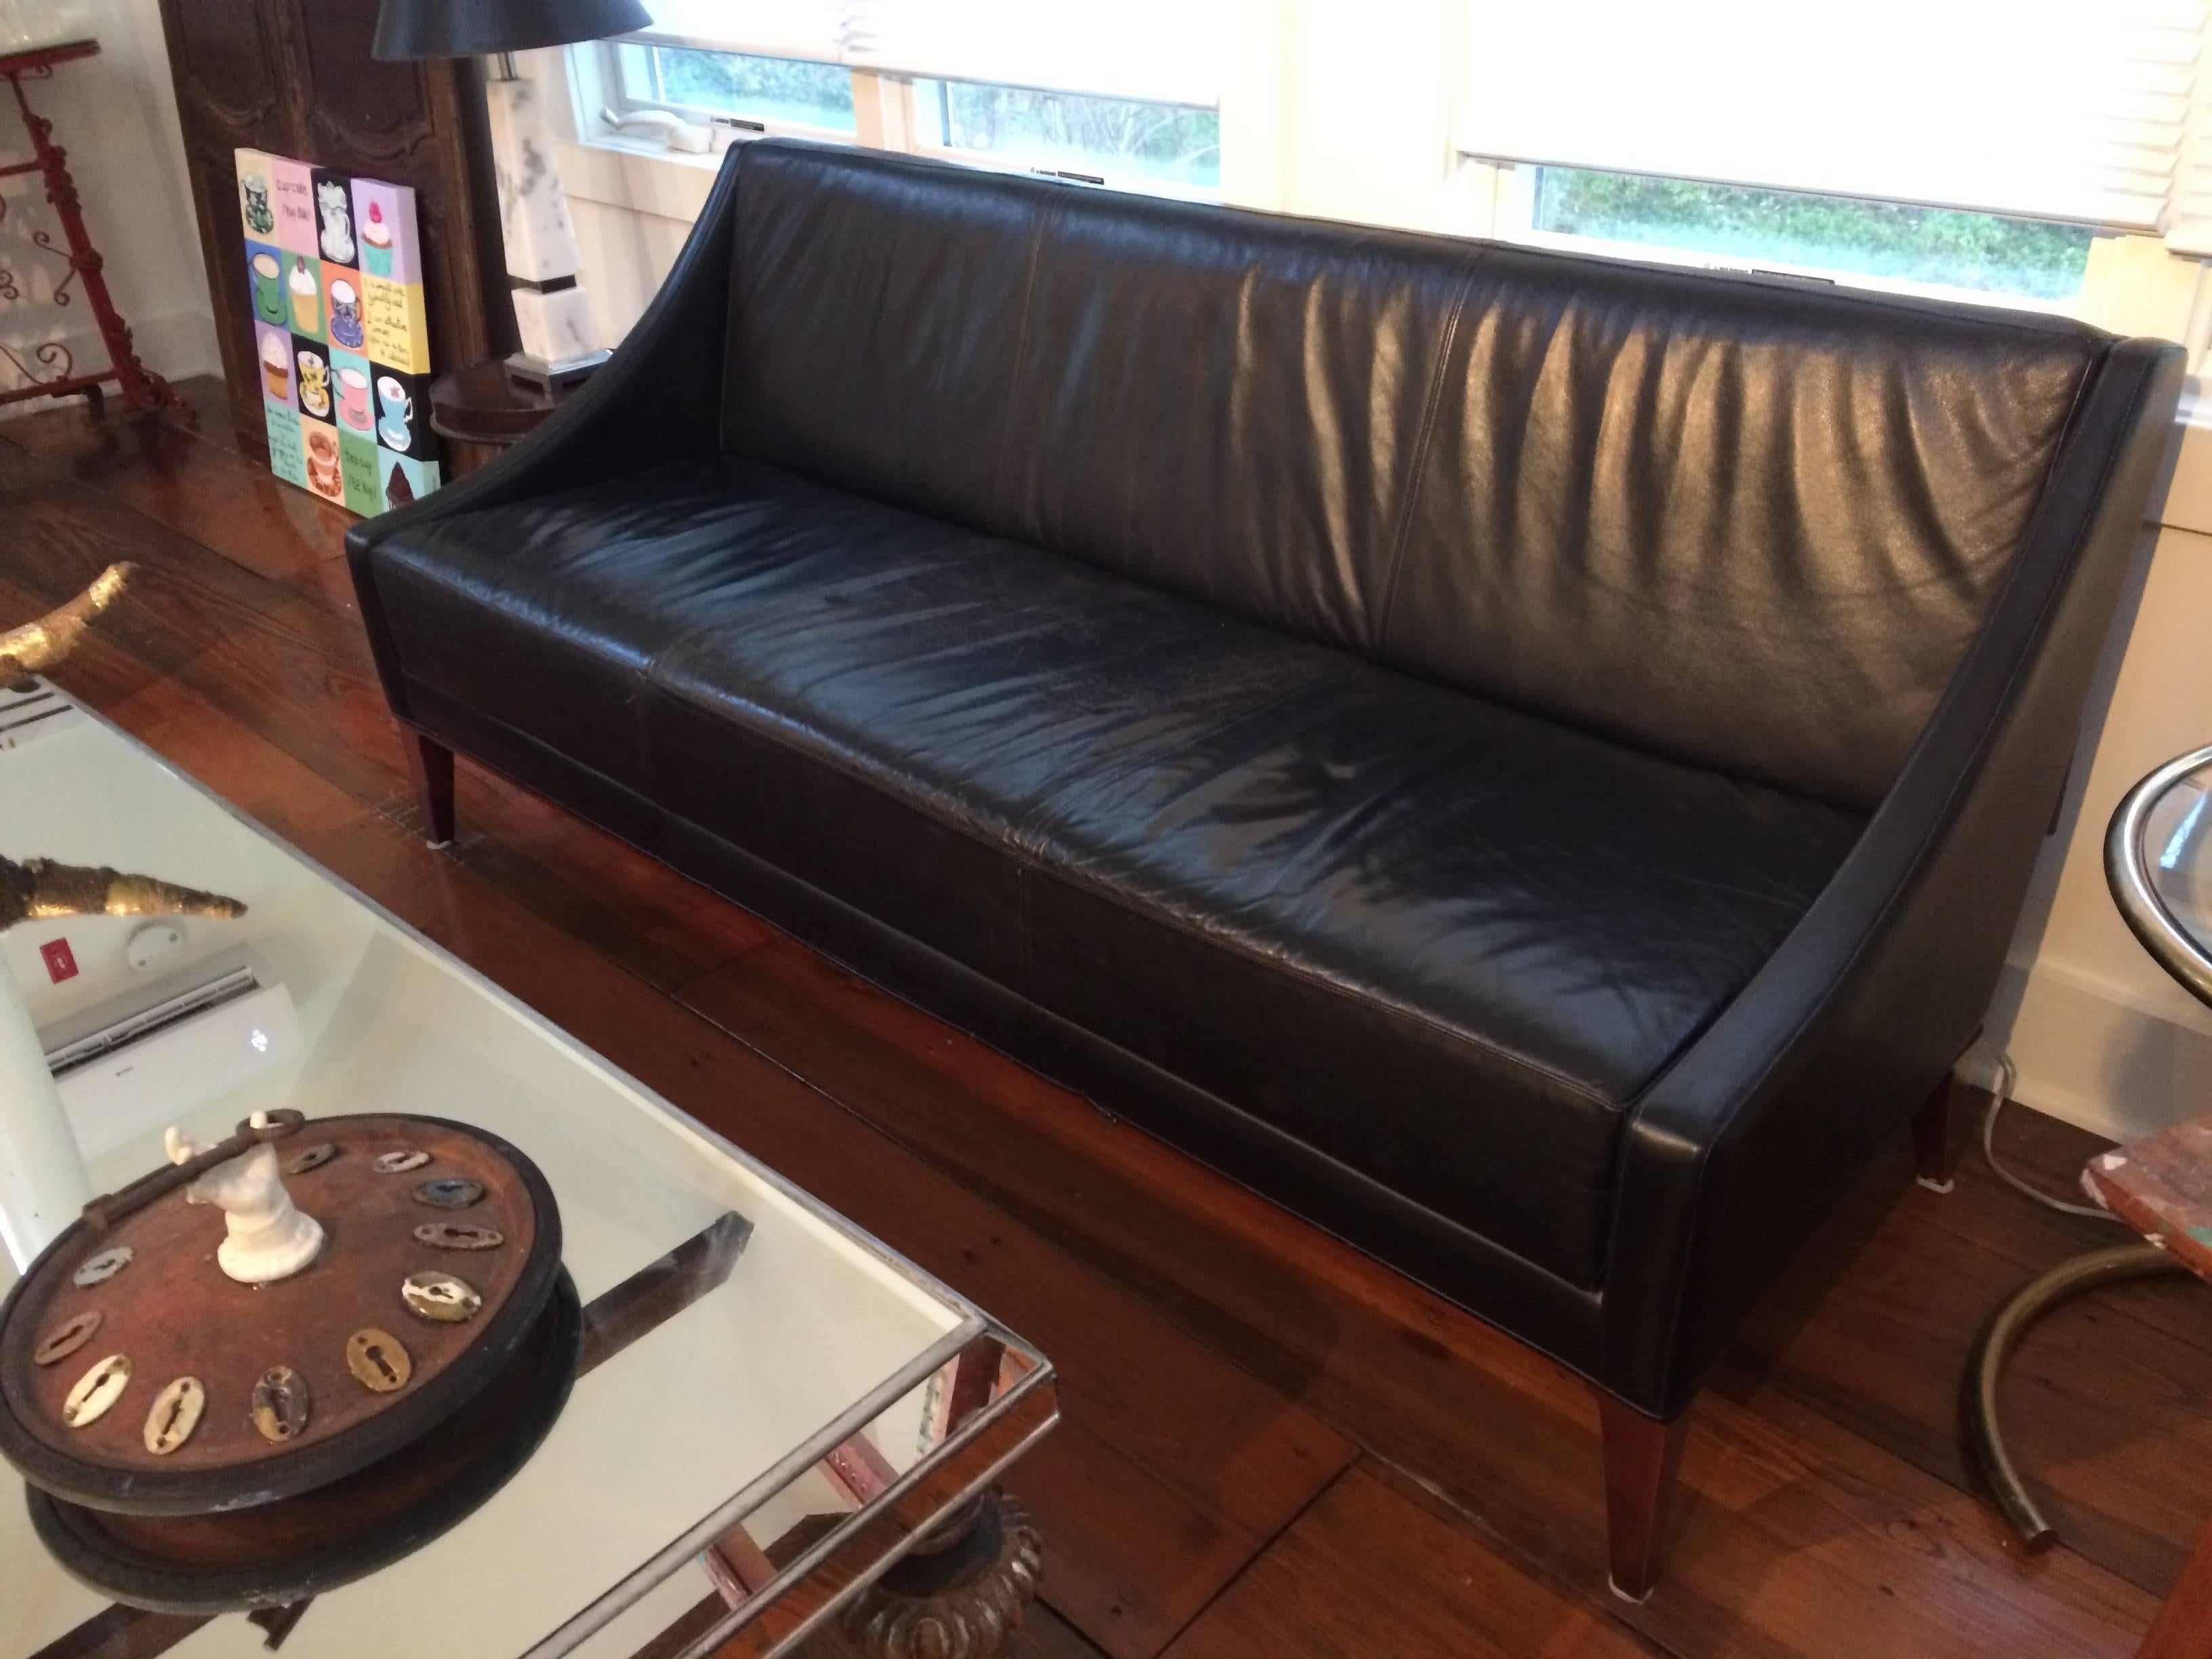 Sleek Mid-Century Modern slightly distressed black leather couch that came from a Men's Club in Philadelphia. Stylish, sexy and tailored.